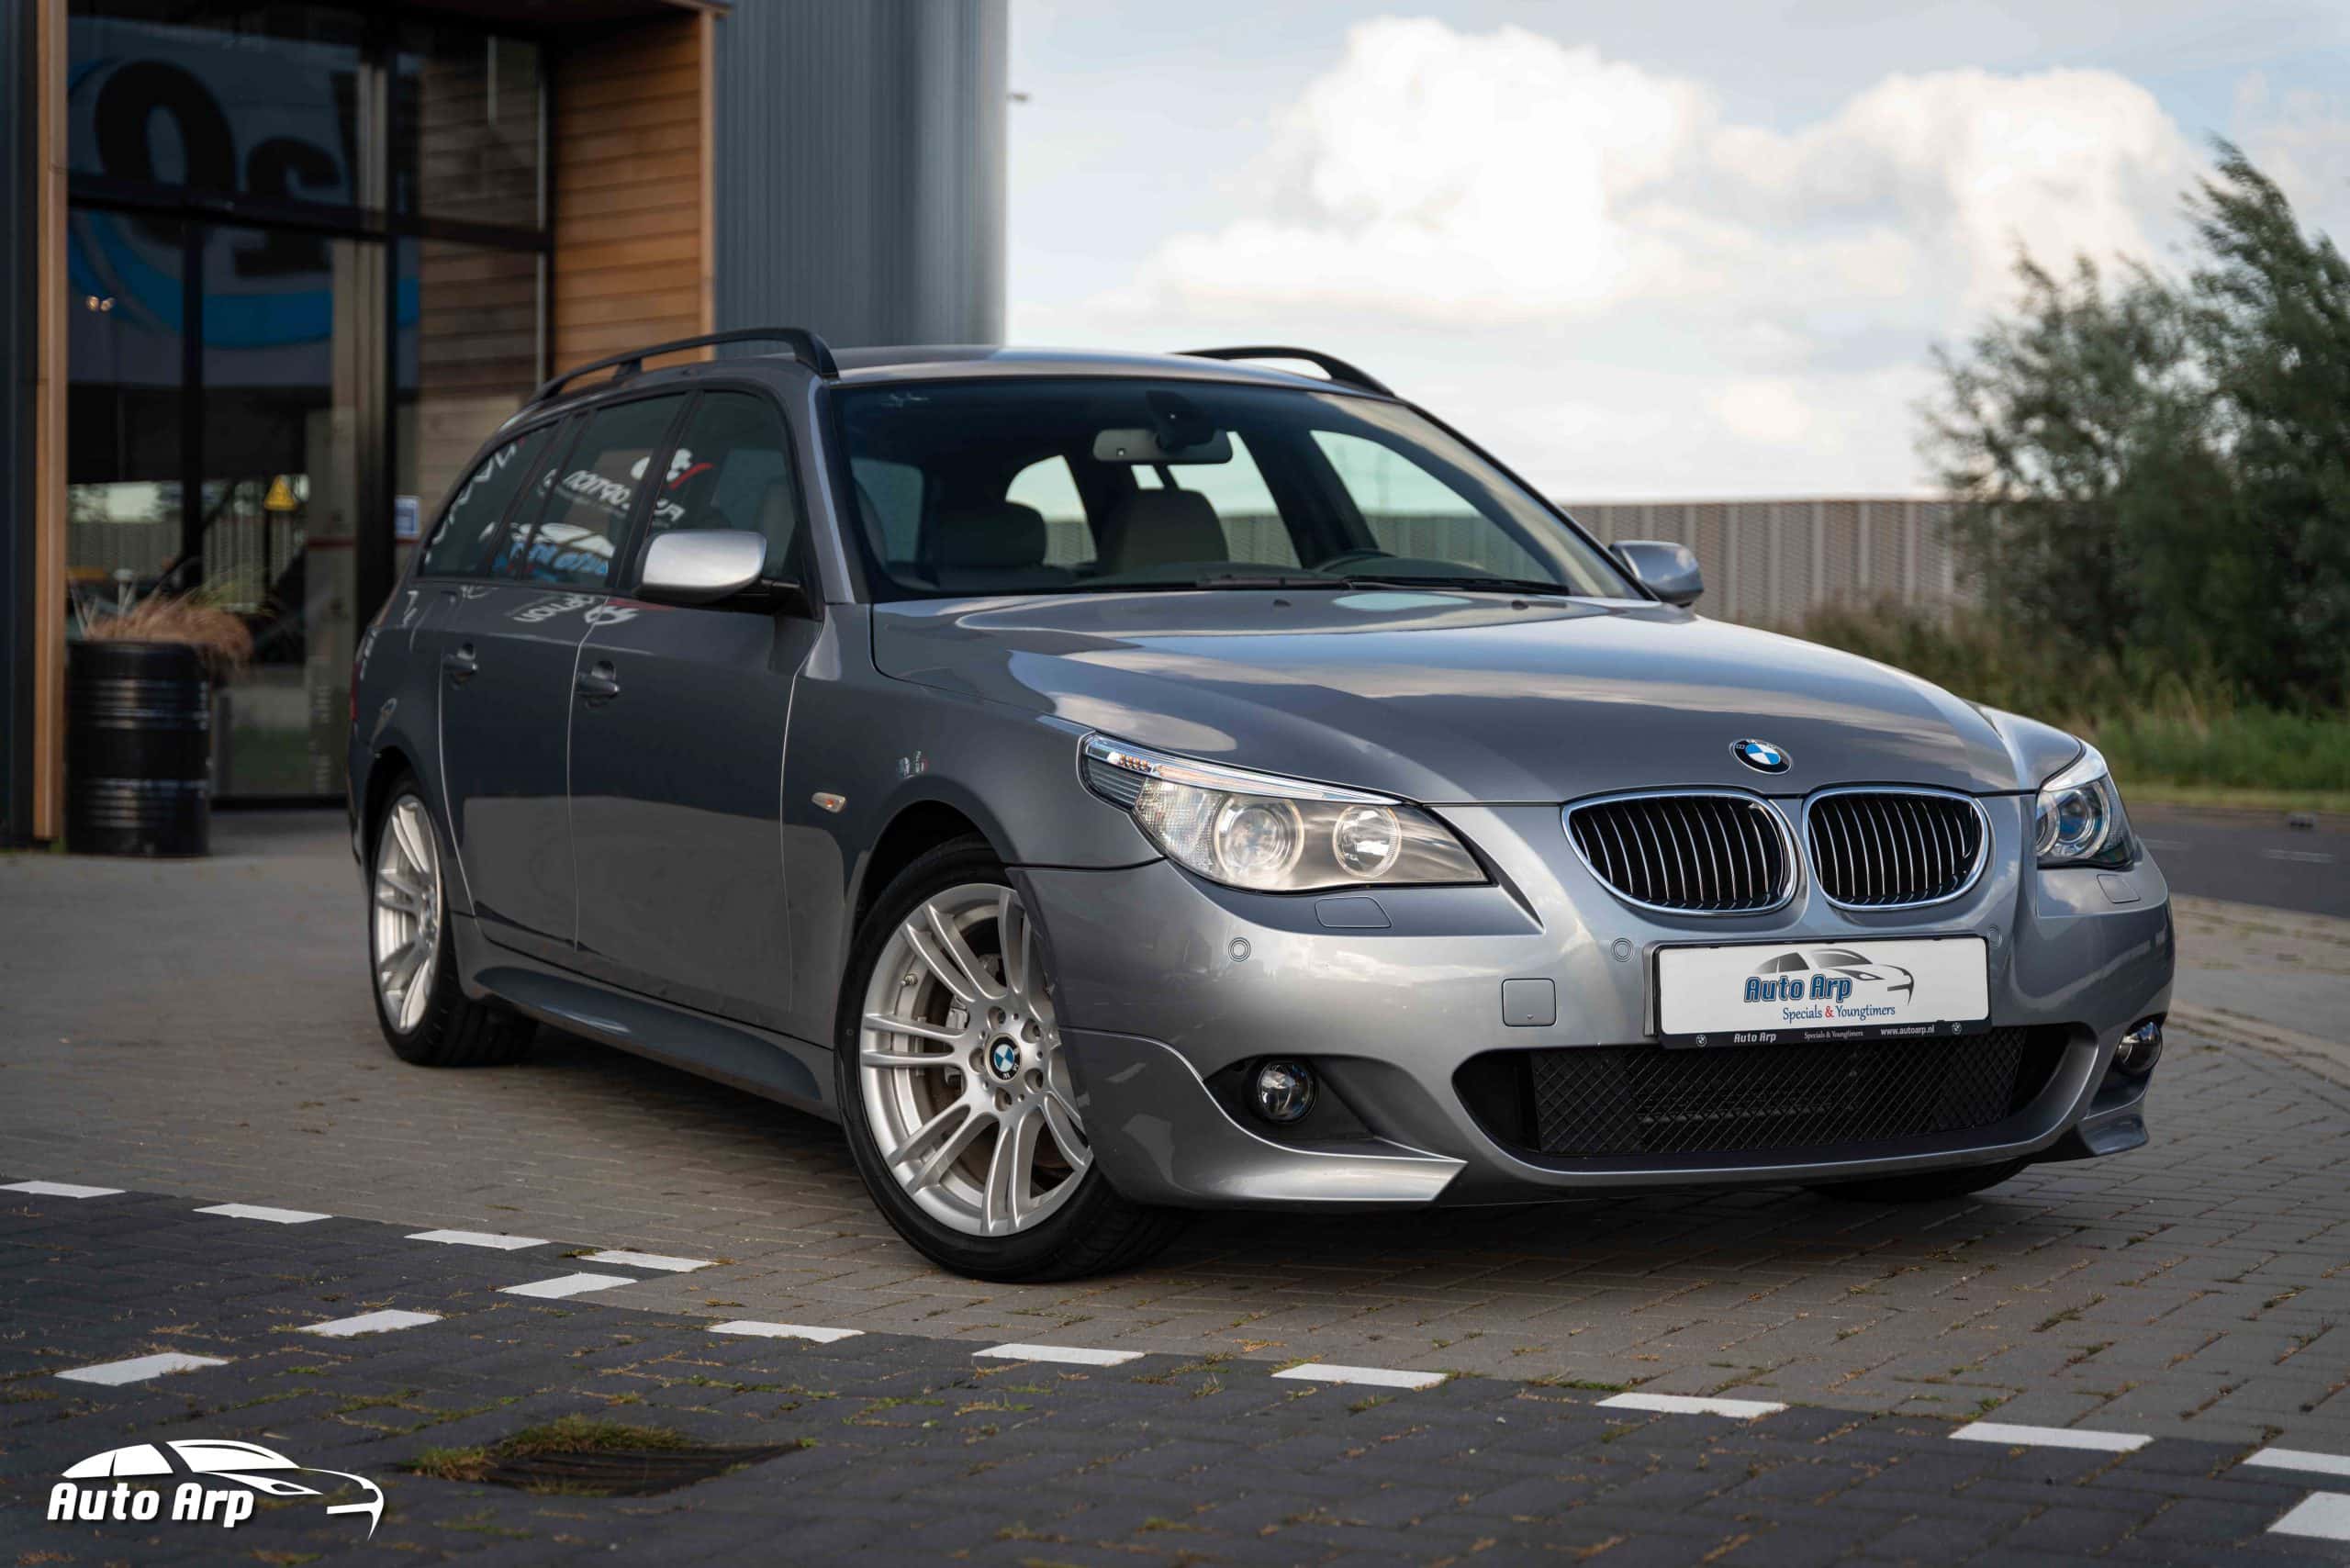 BMW E61 525i Touring with factory M package